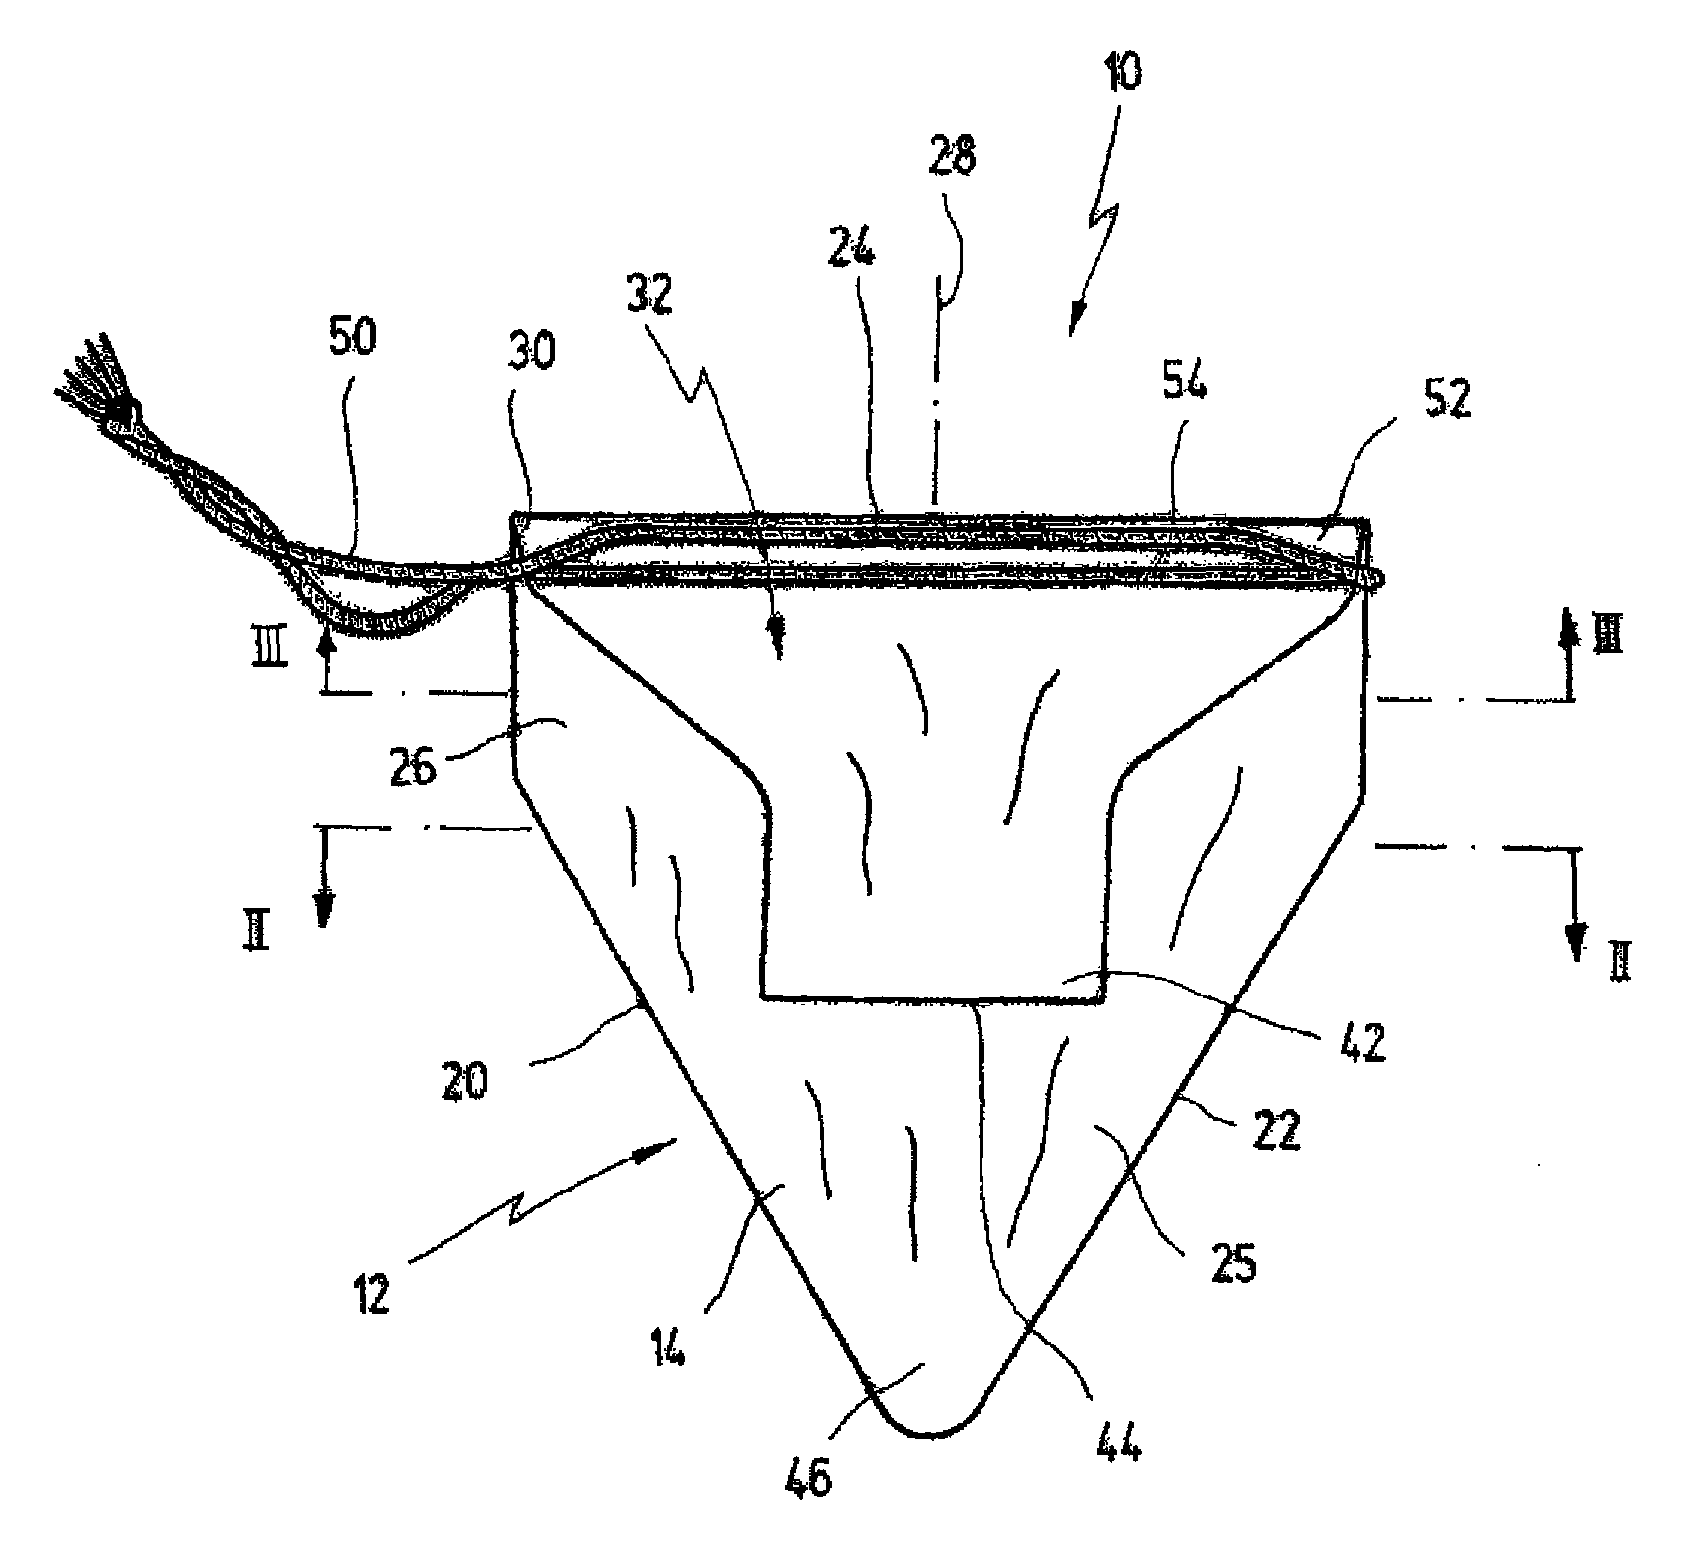 Endosurgical extraction bag for collecting body tissue or body fluid